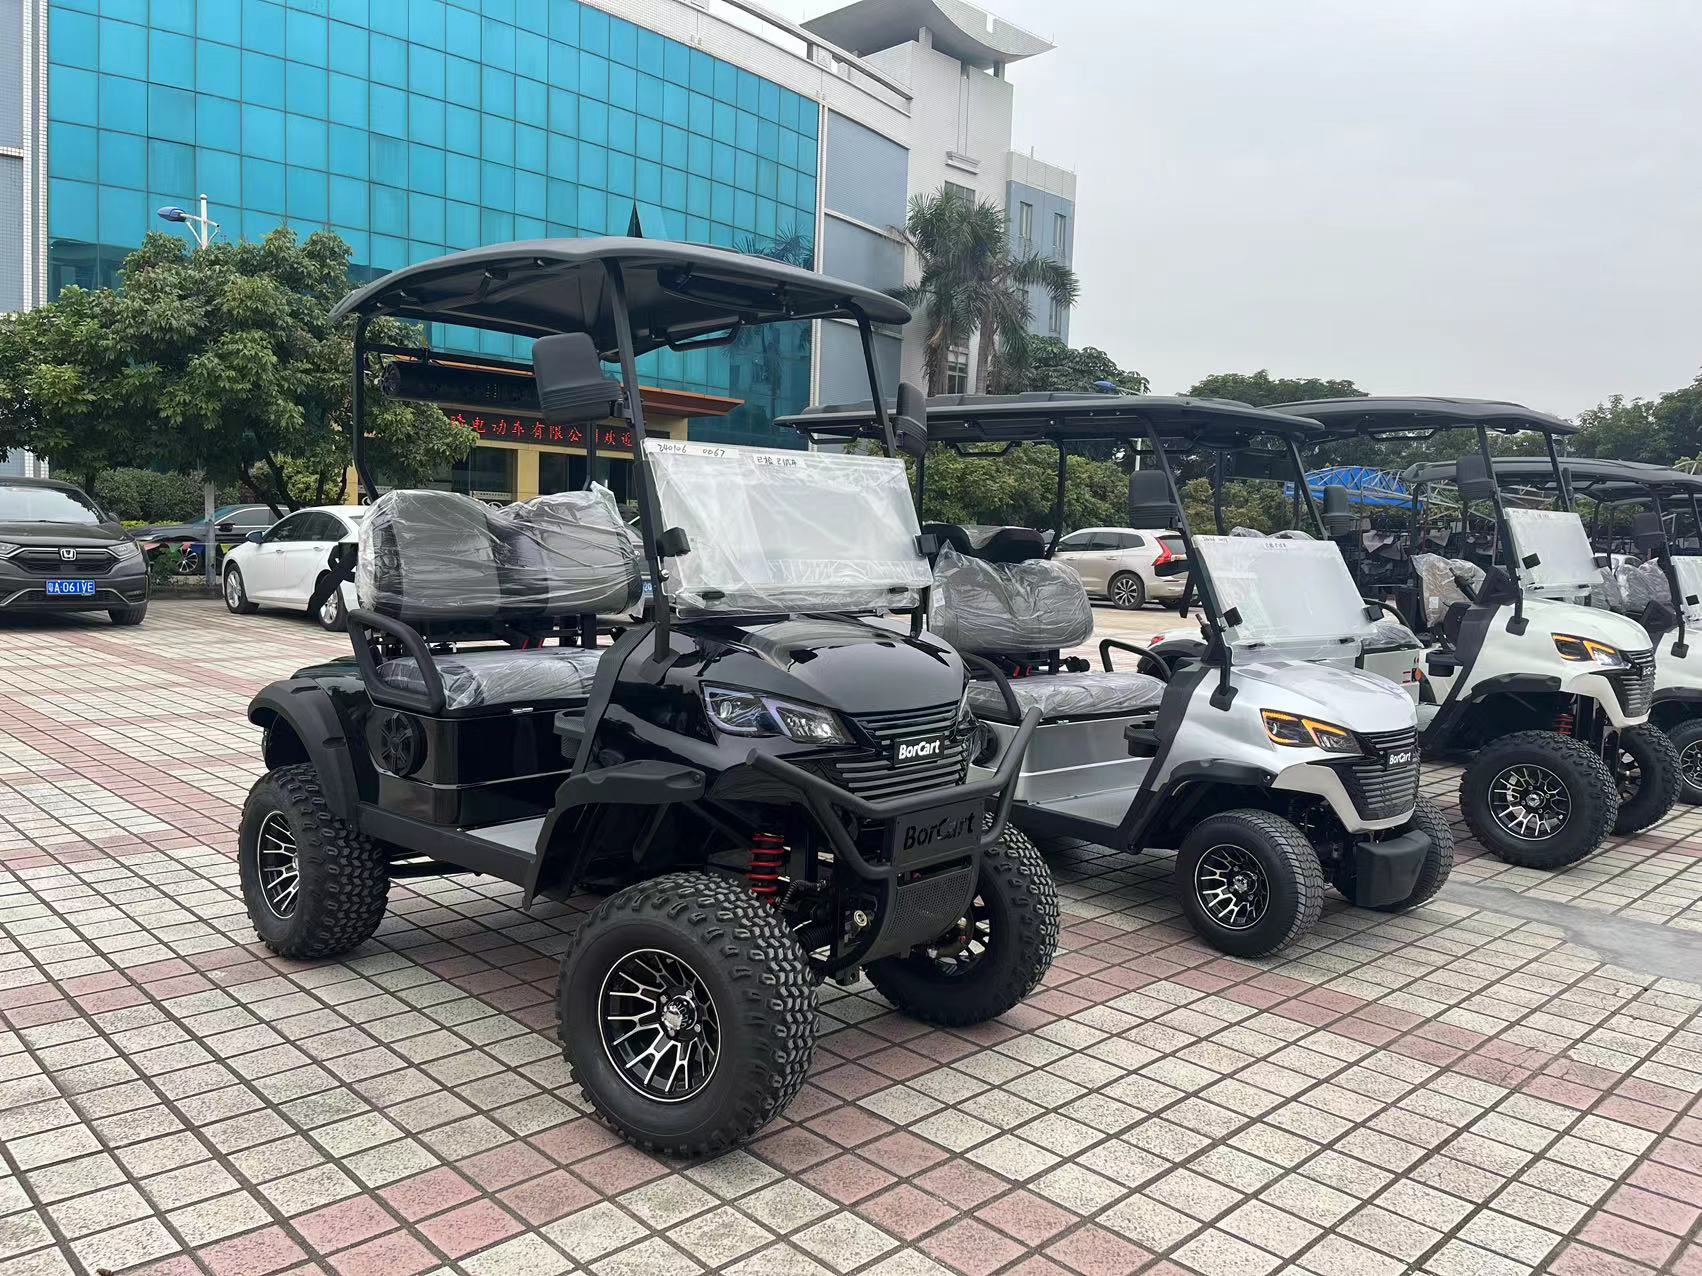 ANO ANG LIFTED ELECTRIC GOLF CARTS?